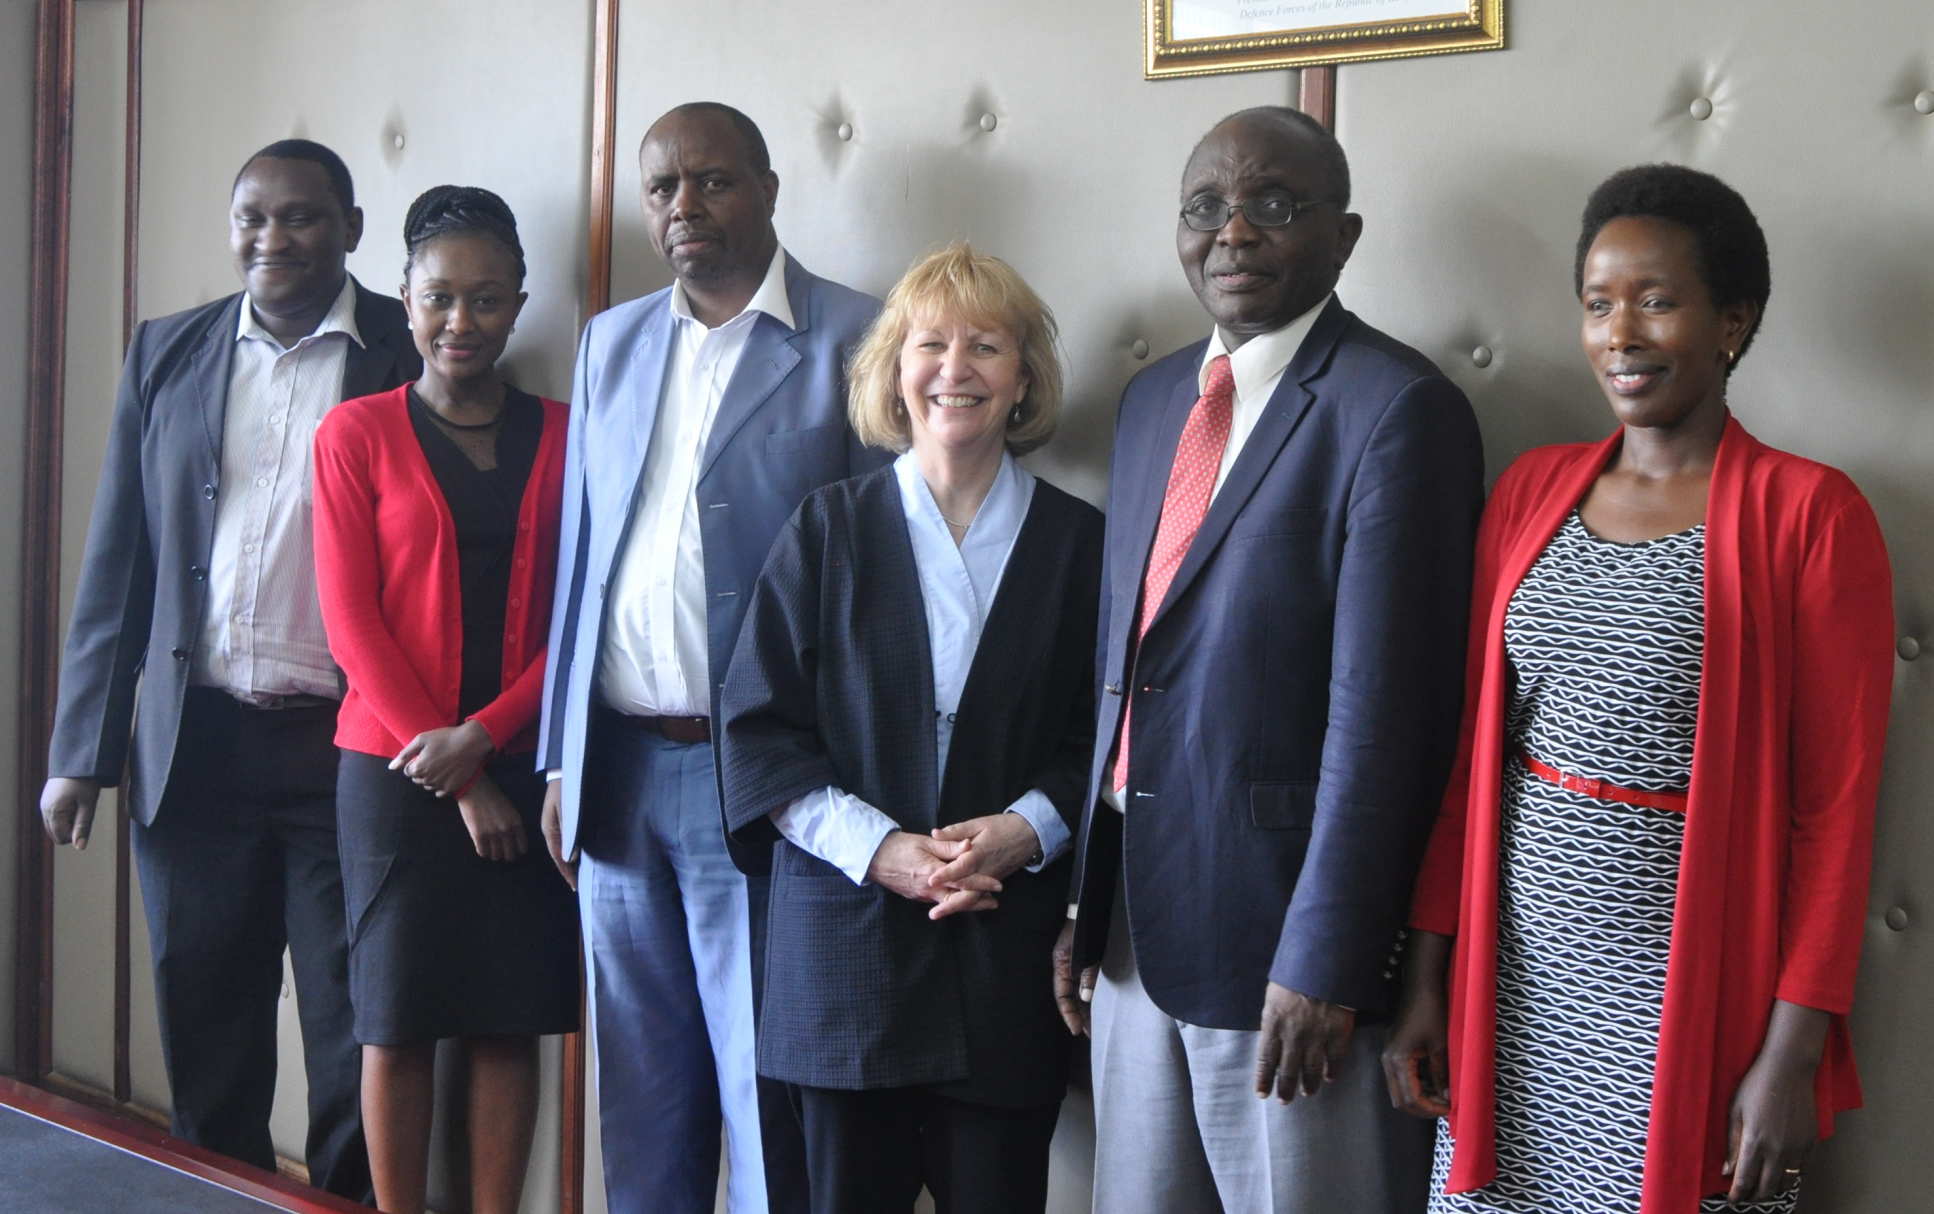 While in Kenya, Professor Dallman met with the Director of the Ministry of Education and the Science Innovation officer. 